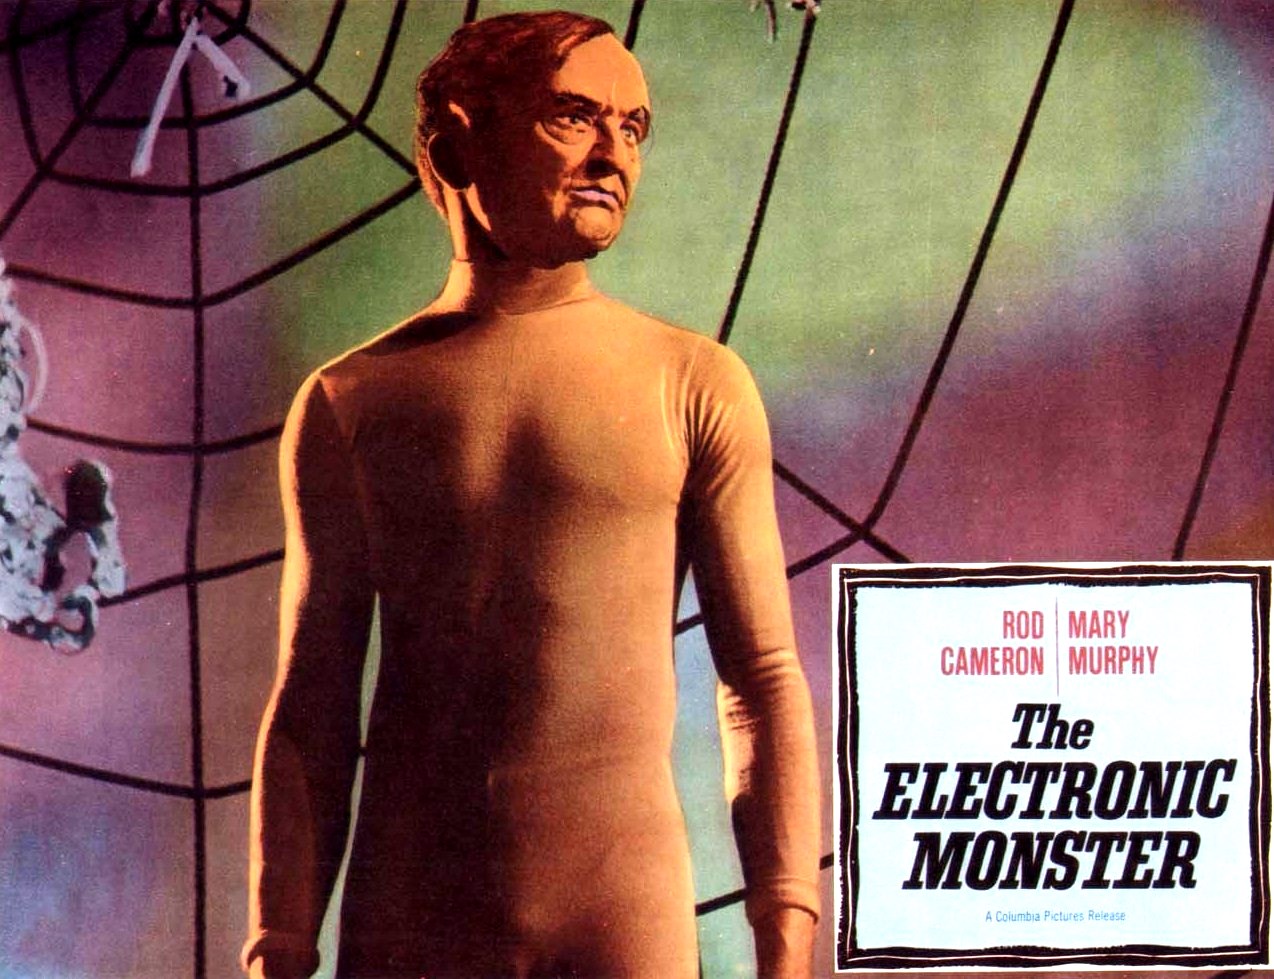 Visions from inside the dream in The Electronic Monster (1960)